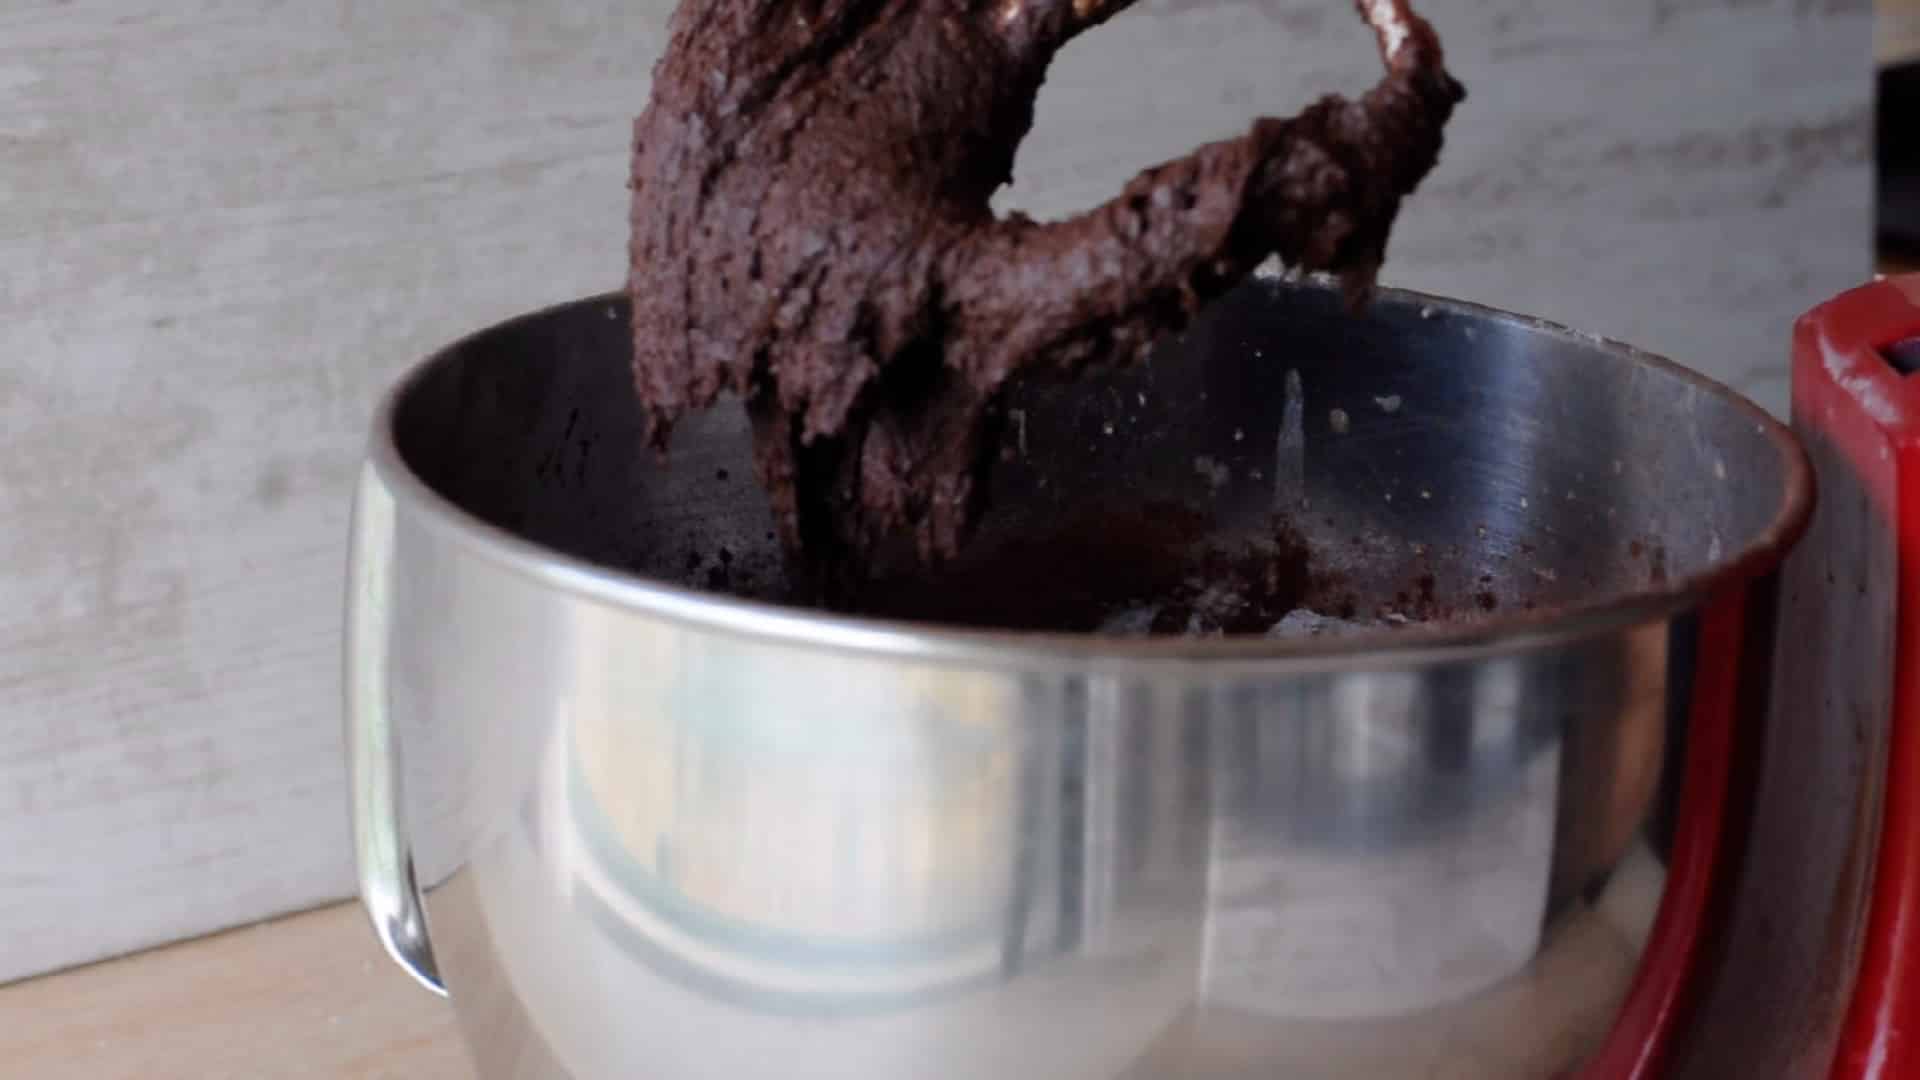 What the chocolate batter looks like hanging from the mixer blade